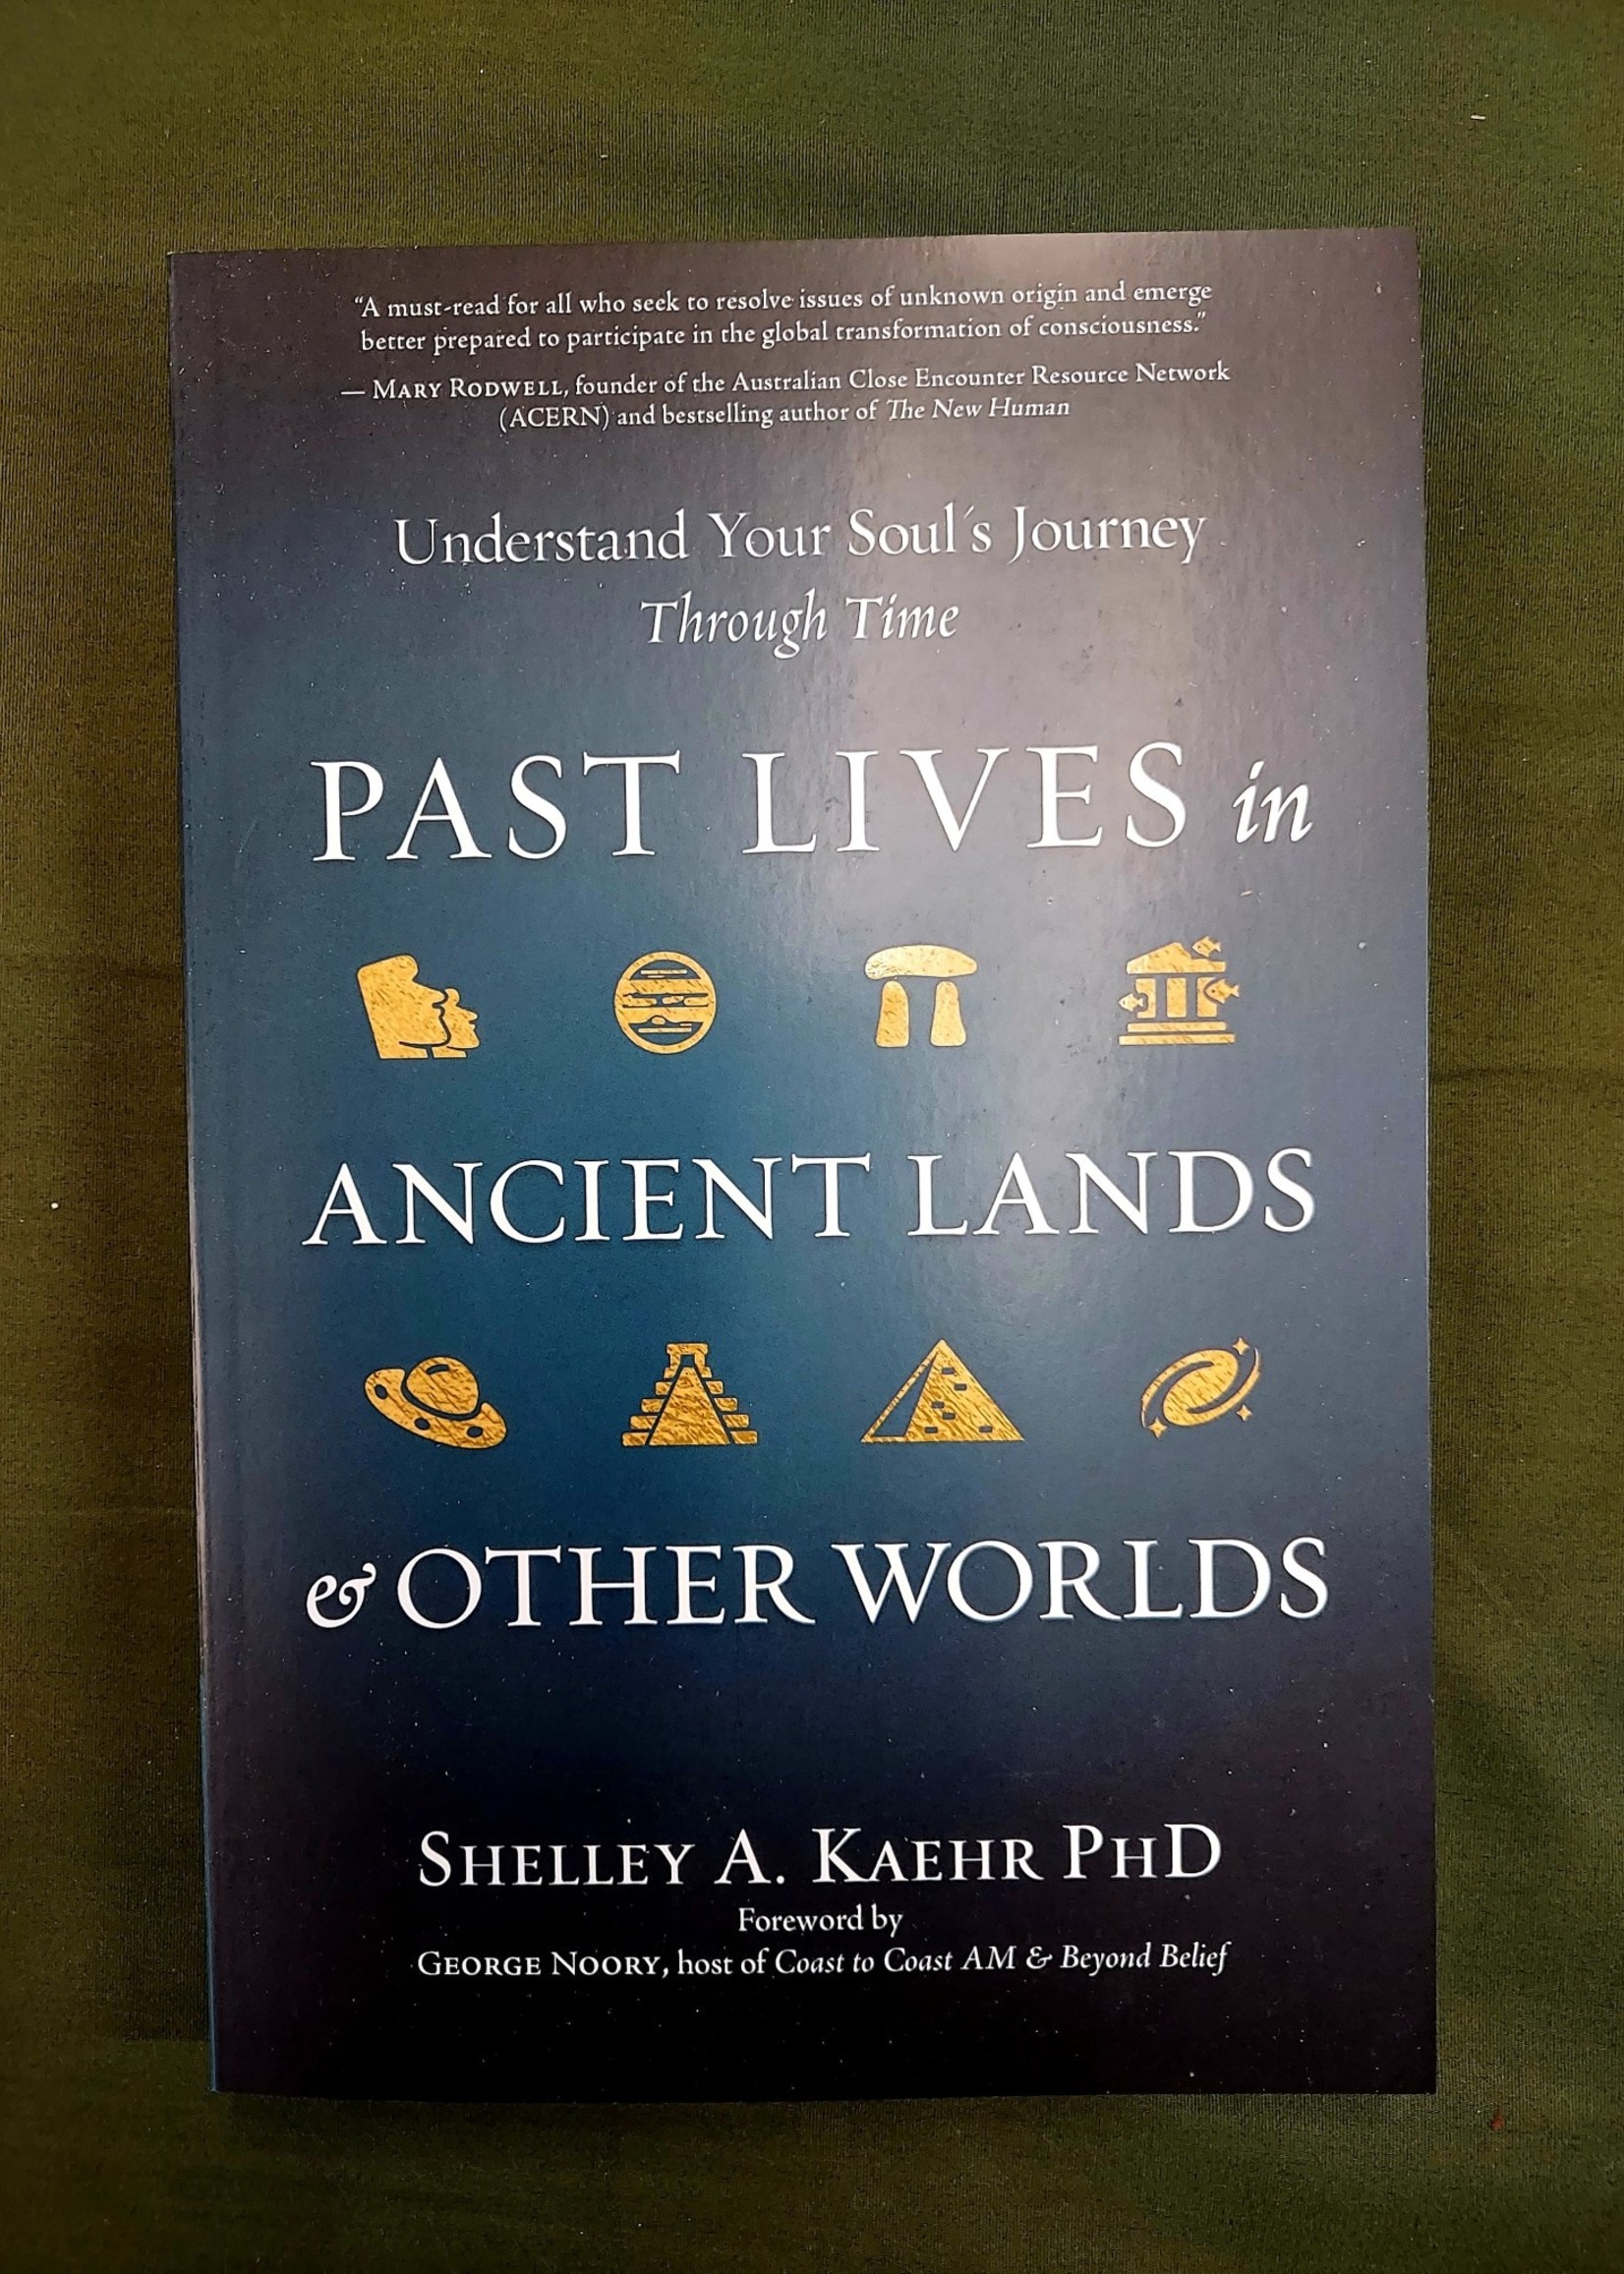 Past Lives in Ancient Lands & Other Worlds-BY SHELLEY A. KAEHR PHD